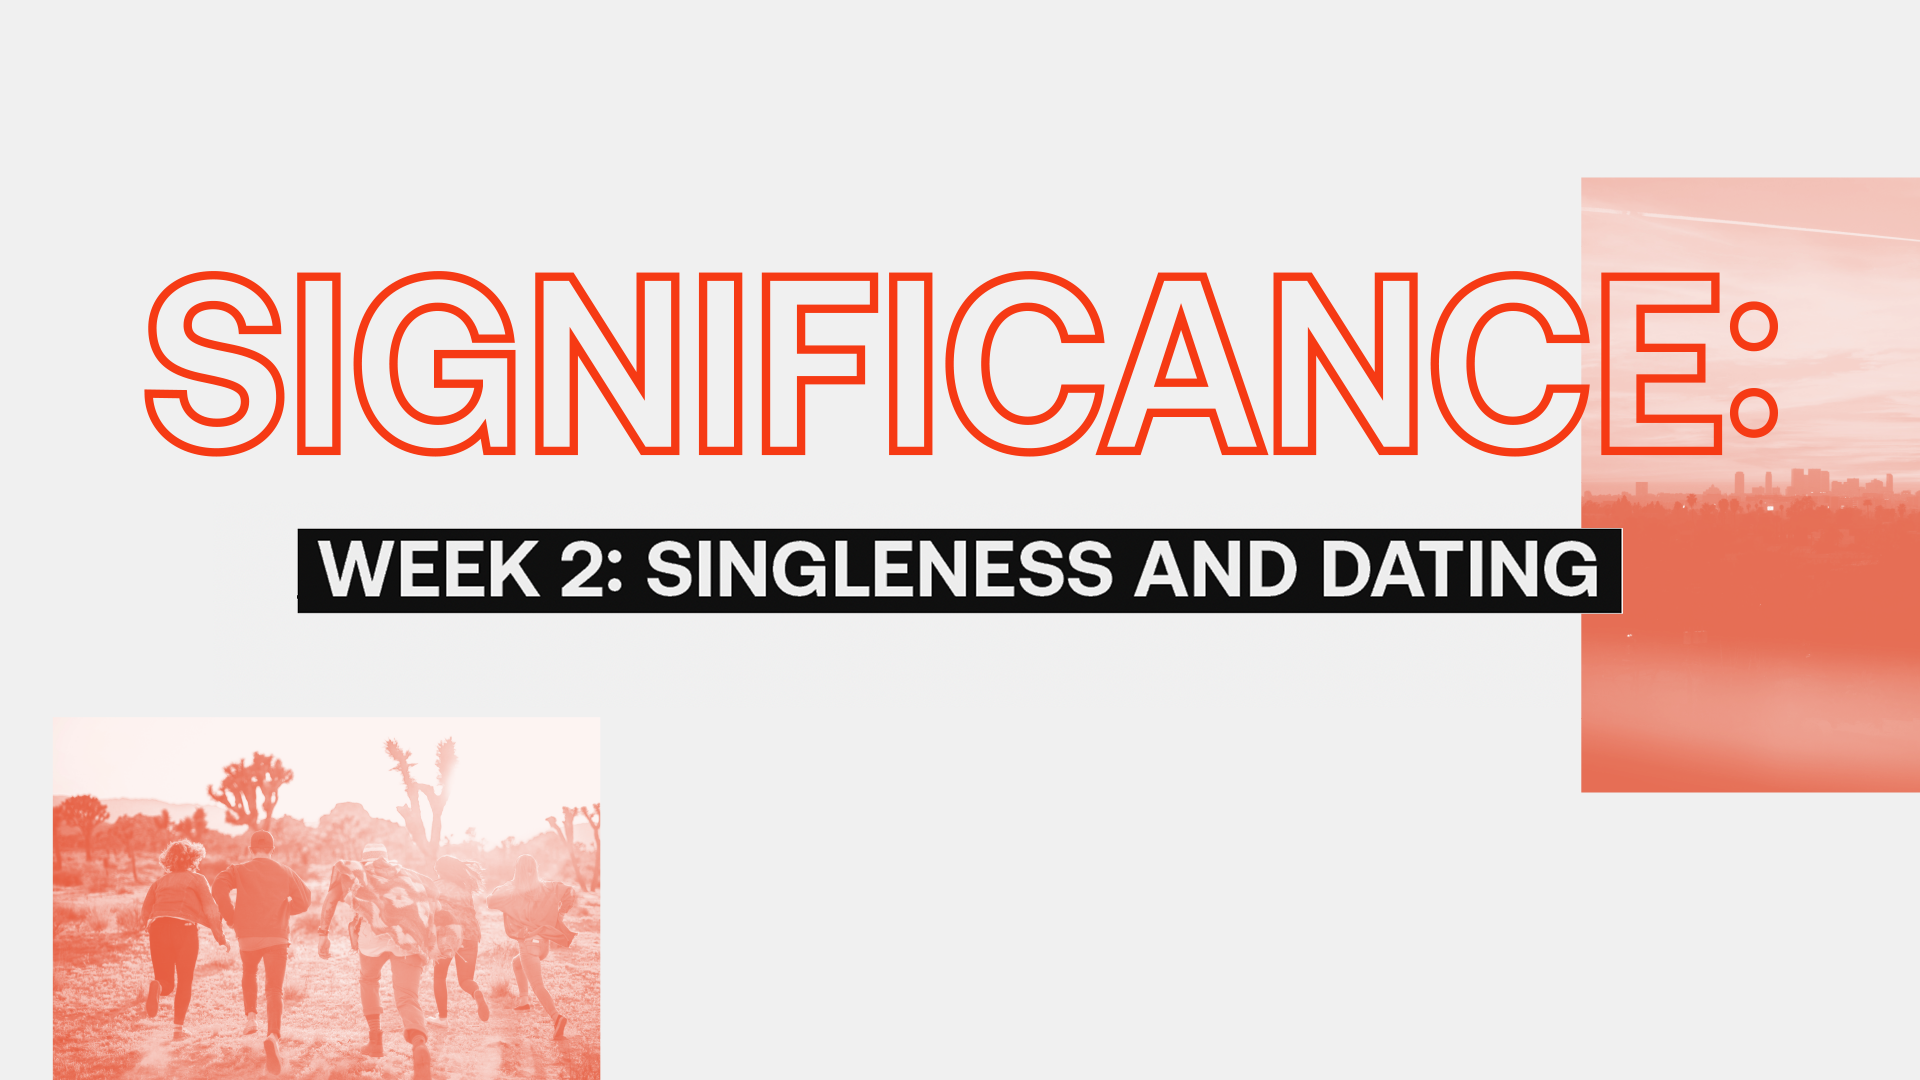 Significance: Singleness and Dating